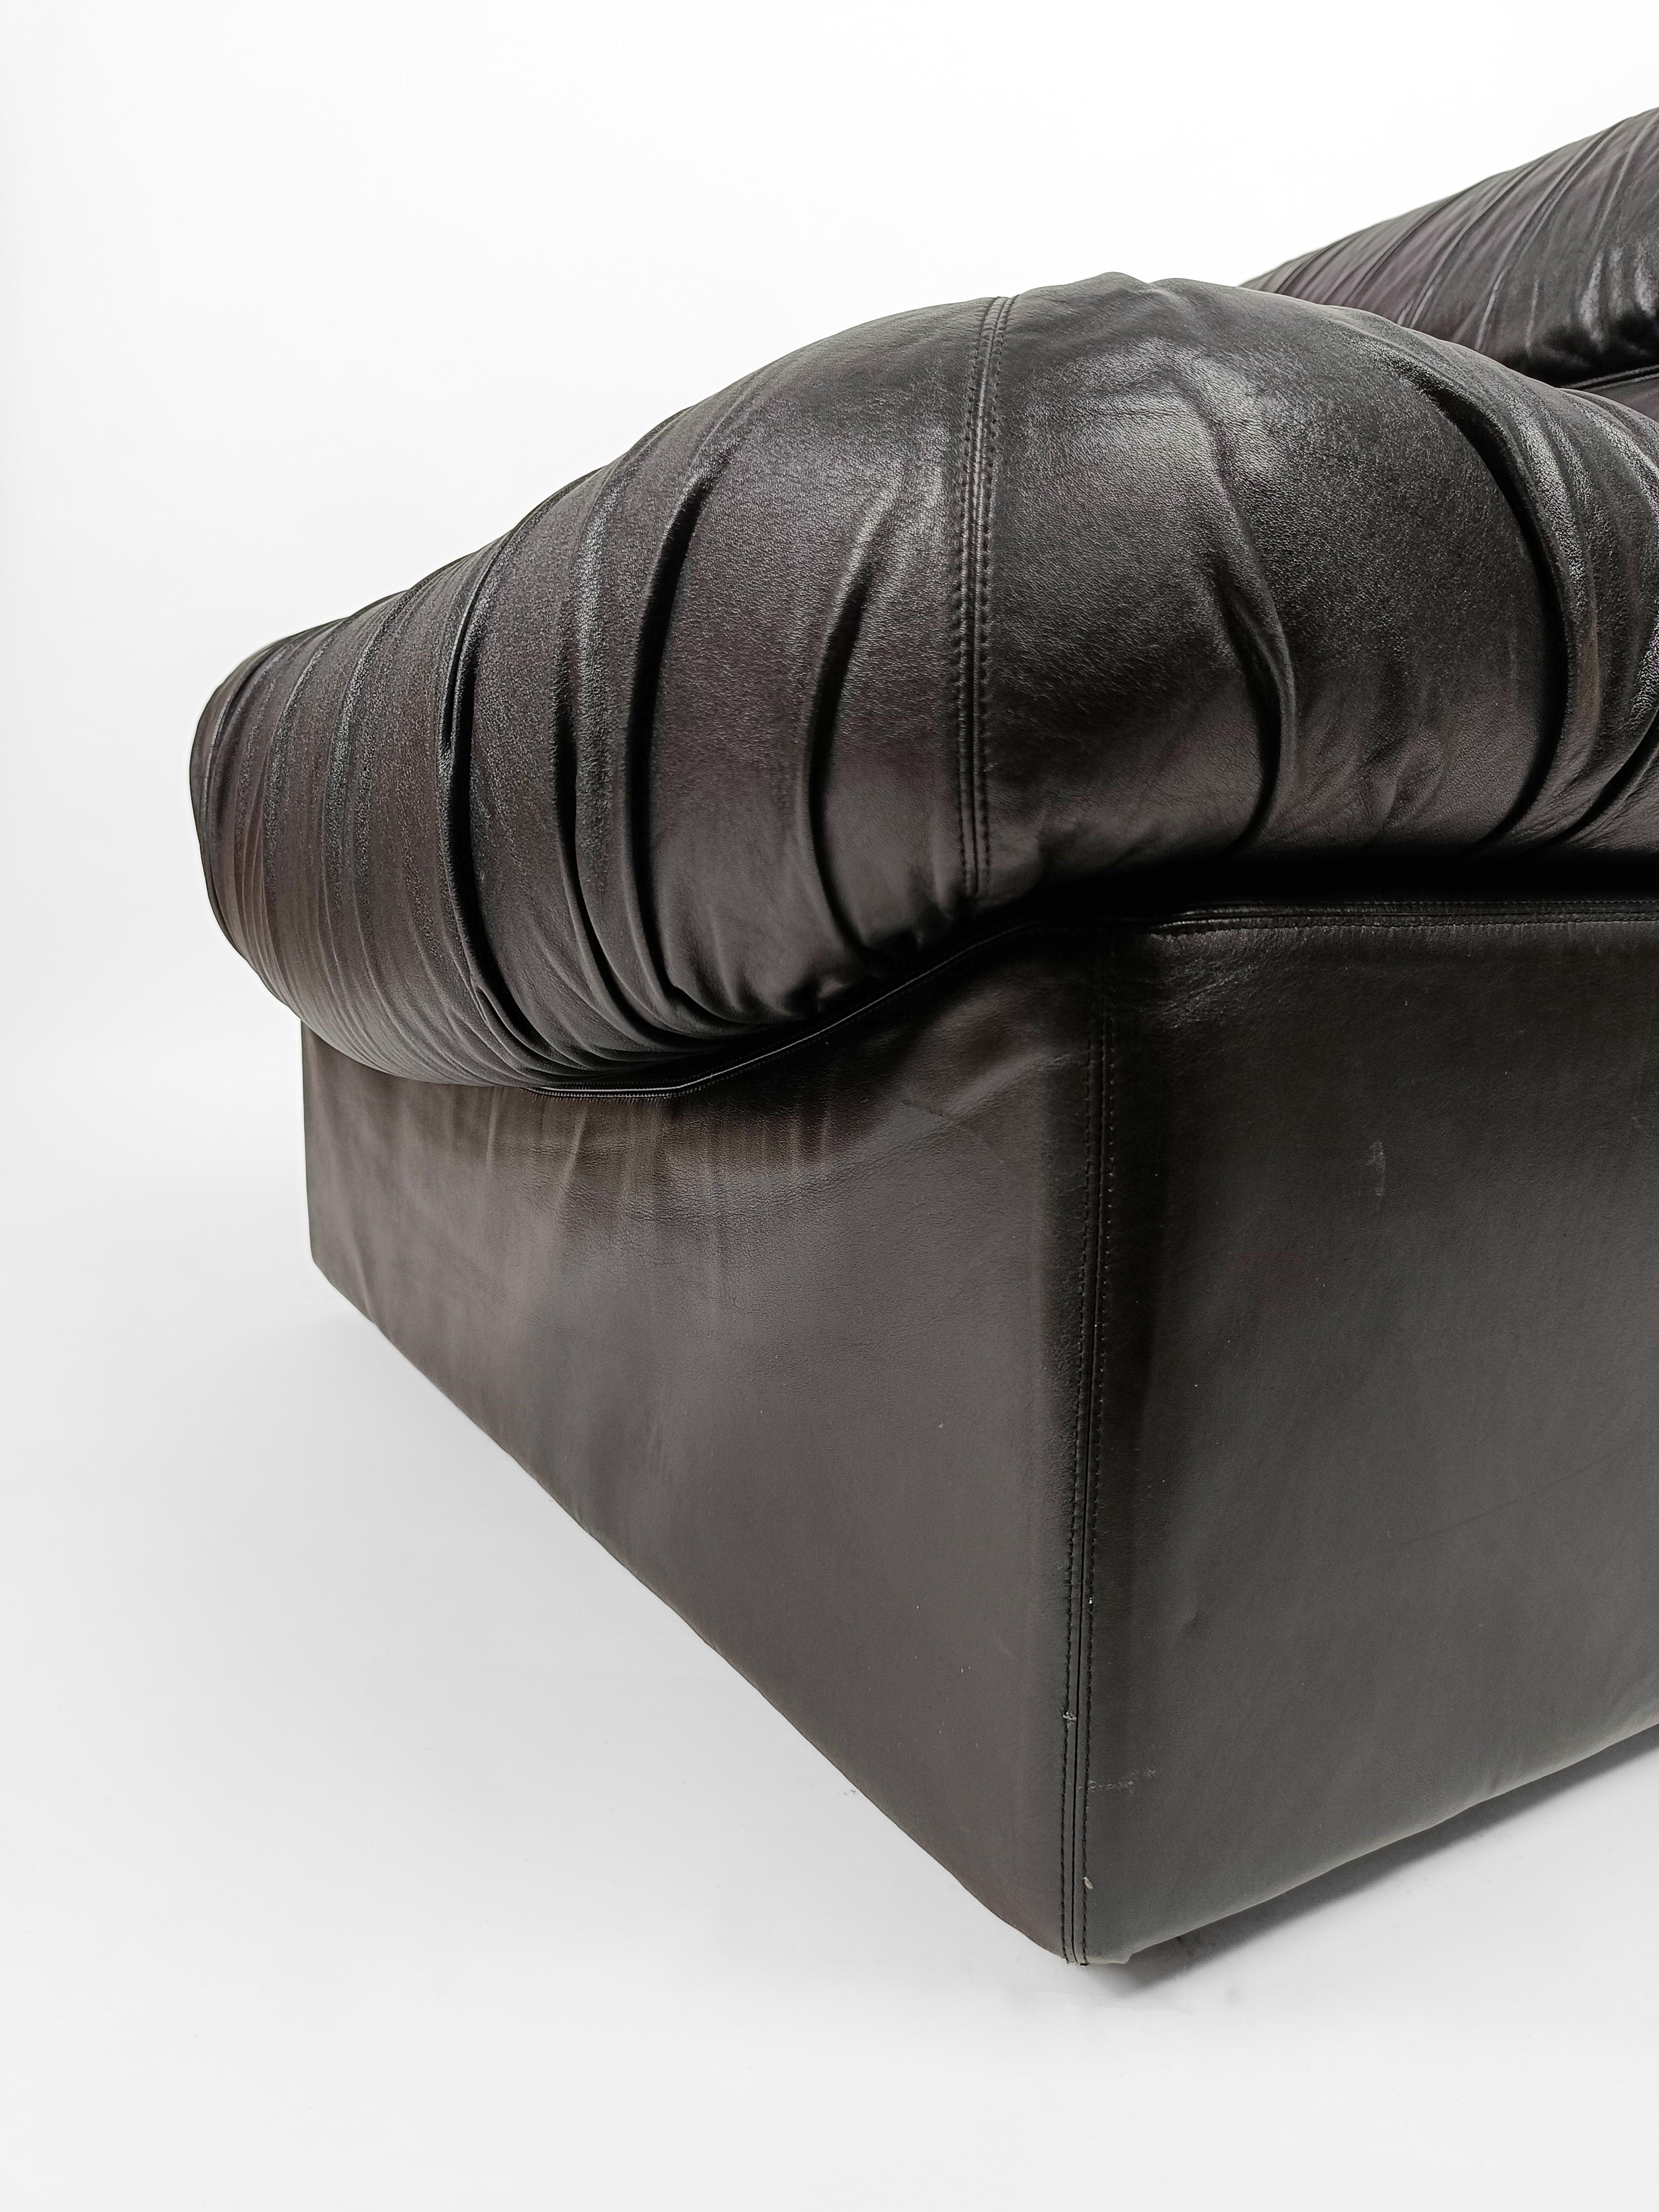 Late 20th Century Italian Modular Lounge Chair in Black Leather model PANAREA by Lev & Lev, 1970s  For Sale